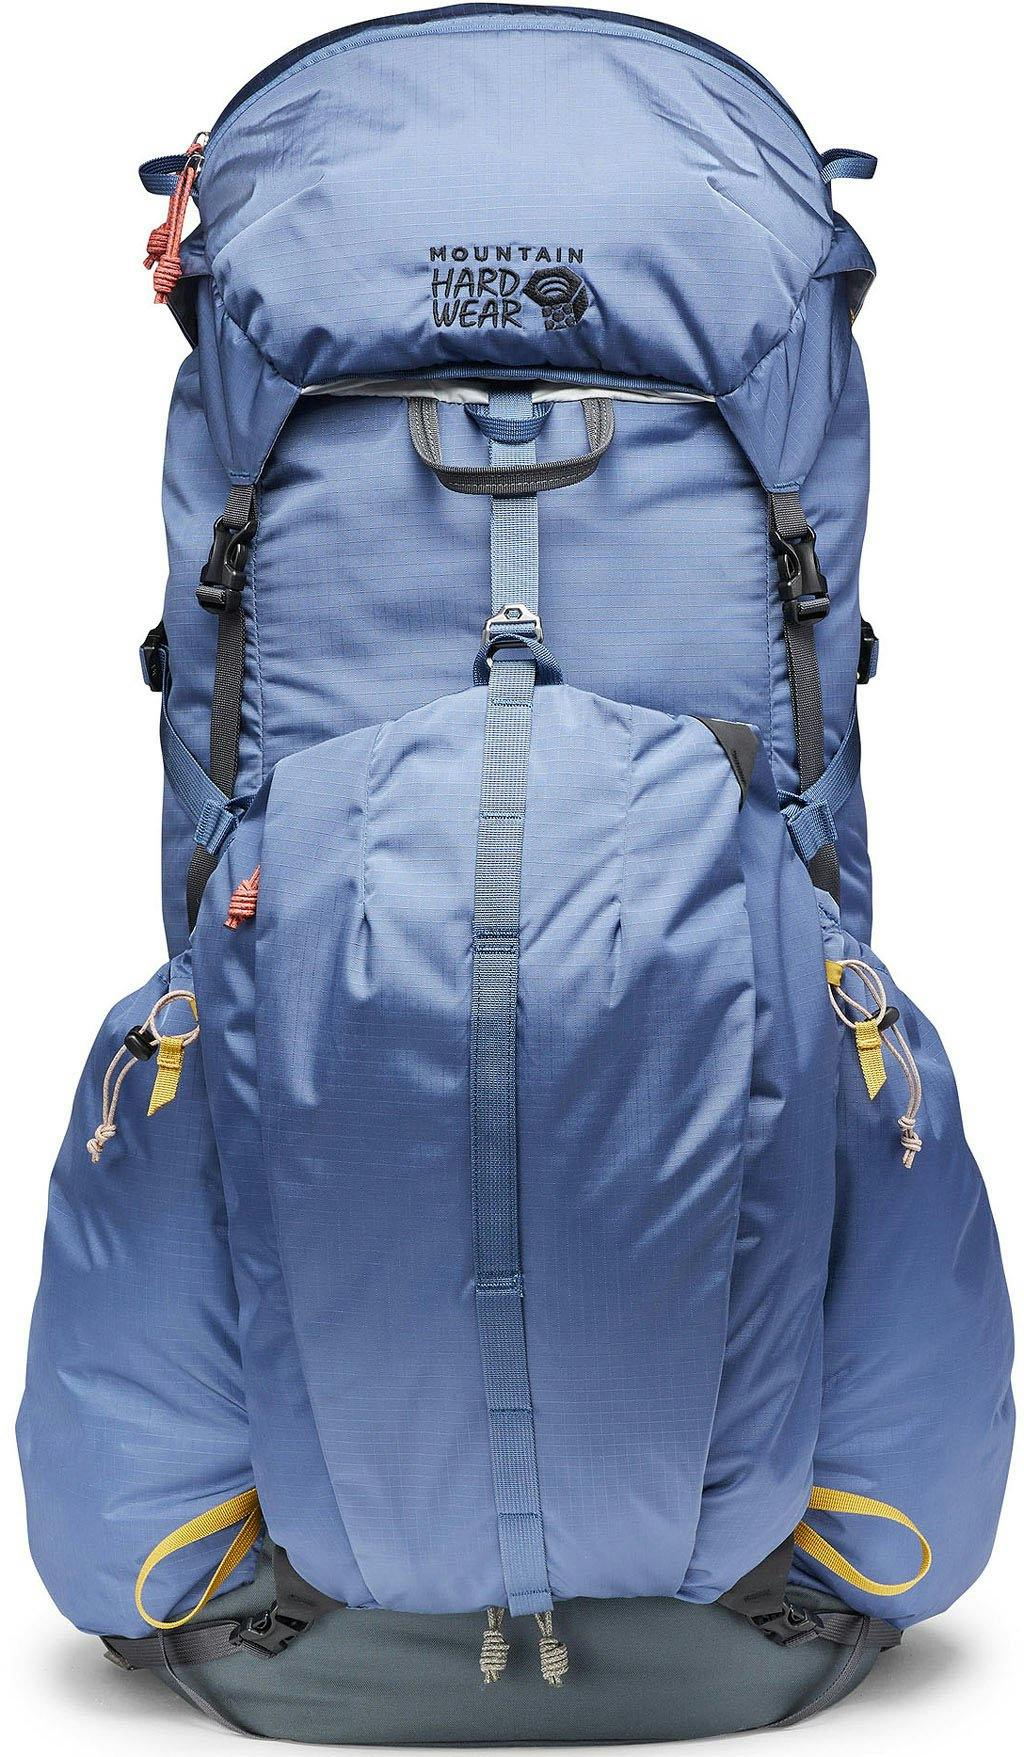 Product image for PCT Hiking Pack 50L - Women's